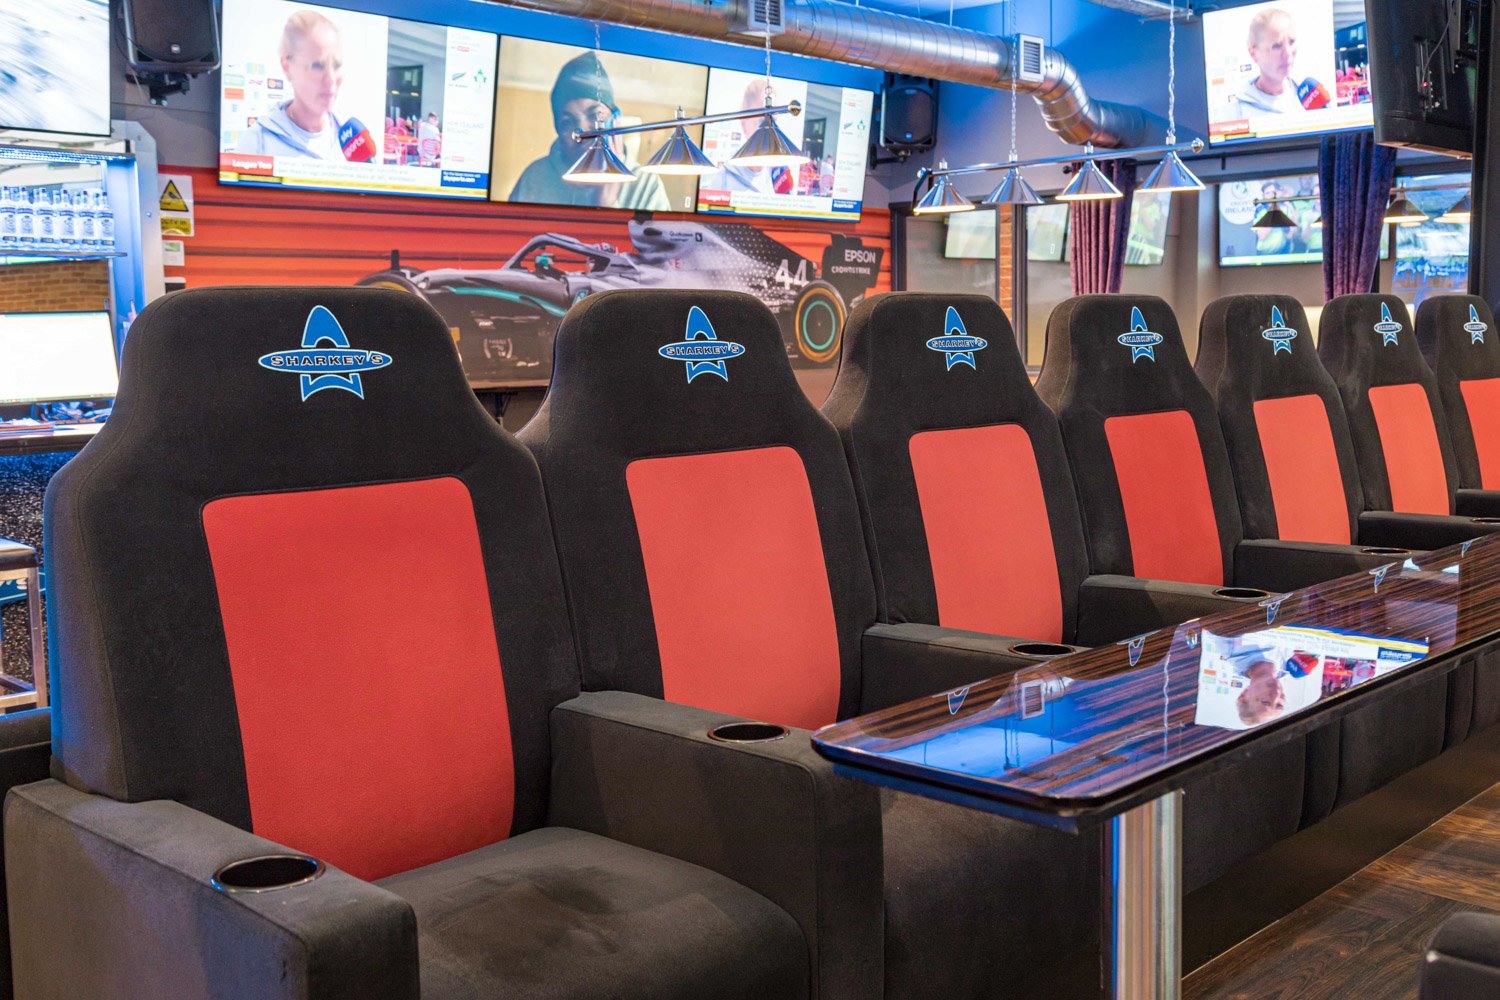 &lt;strong&gt; STADIUM SEATING&lt;/strong&gt; &lt;a href=/booking-locations&gt; BOOK NOW ↑&lt;/a&gt;